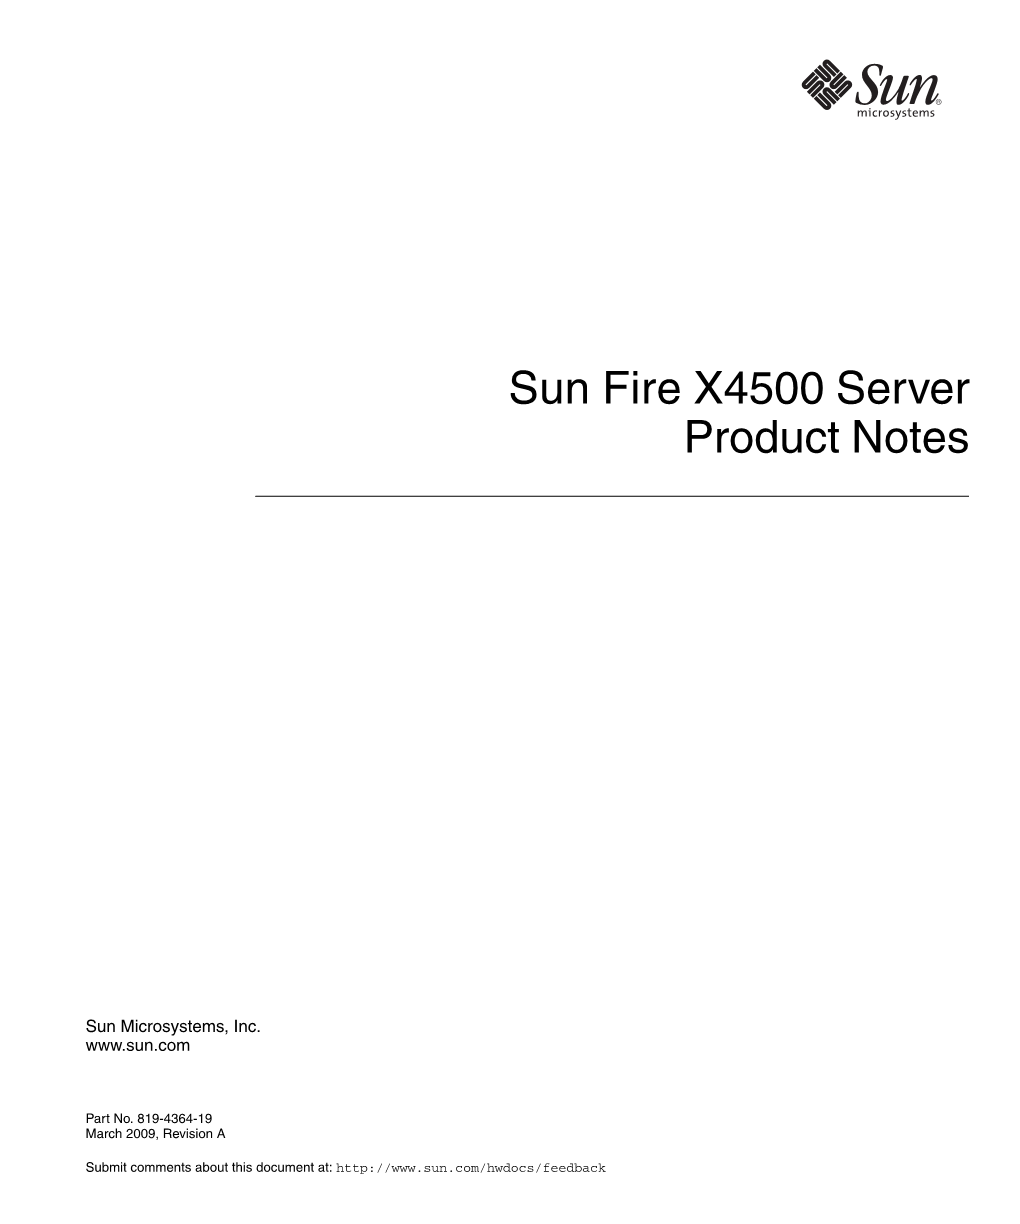 Sun Fire X4500 Server Product Notes